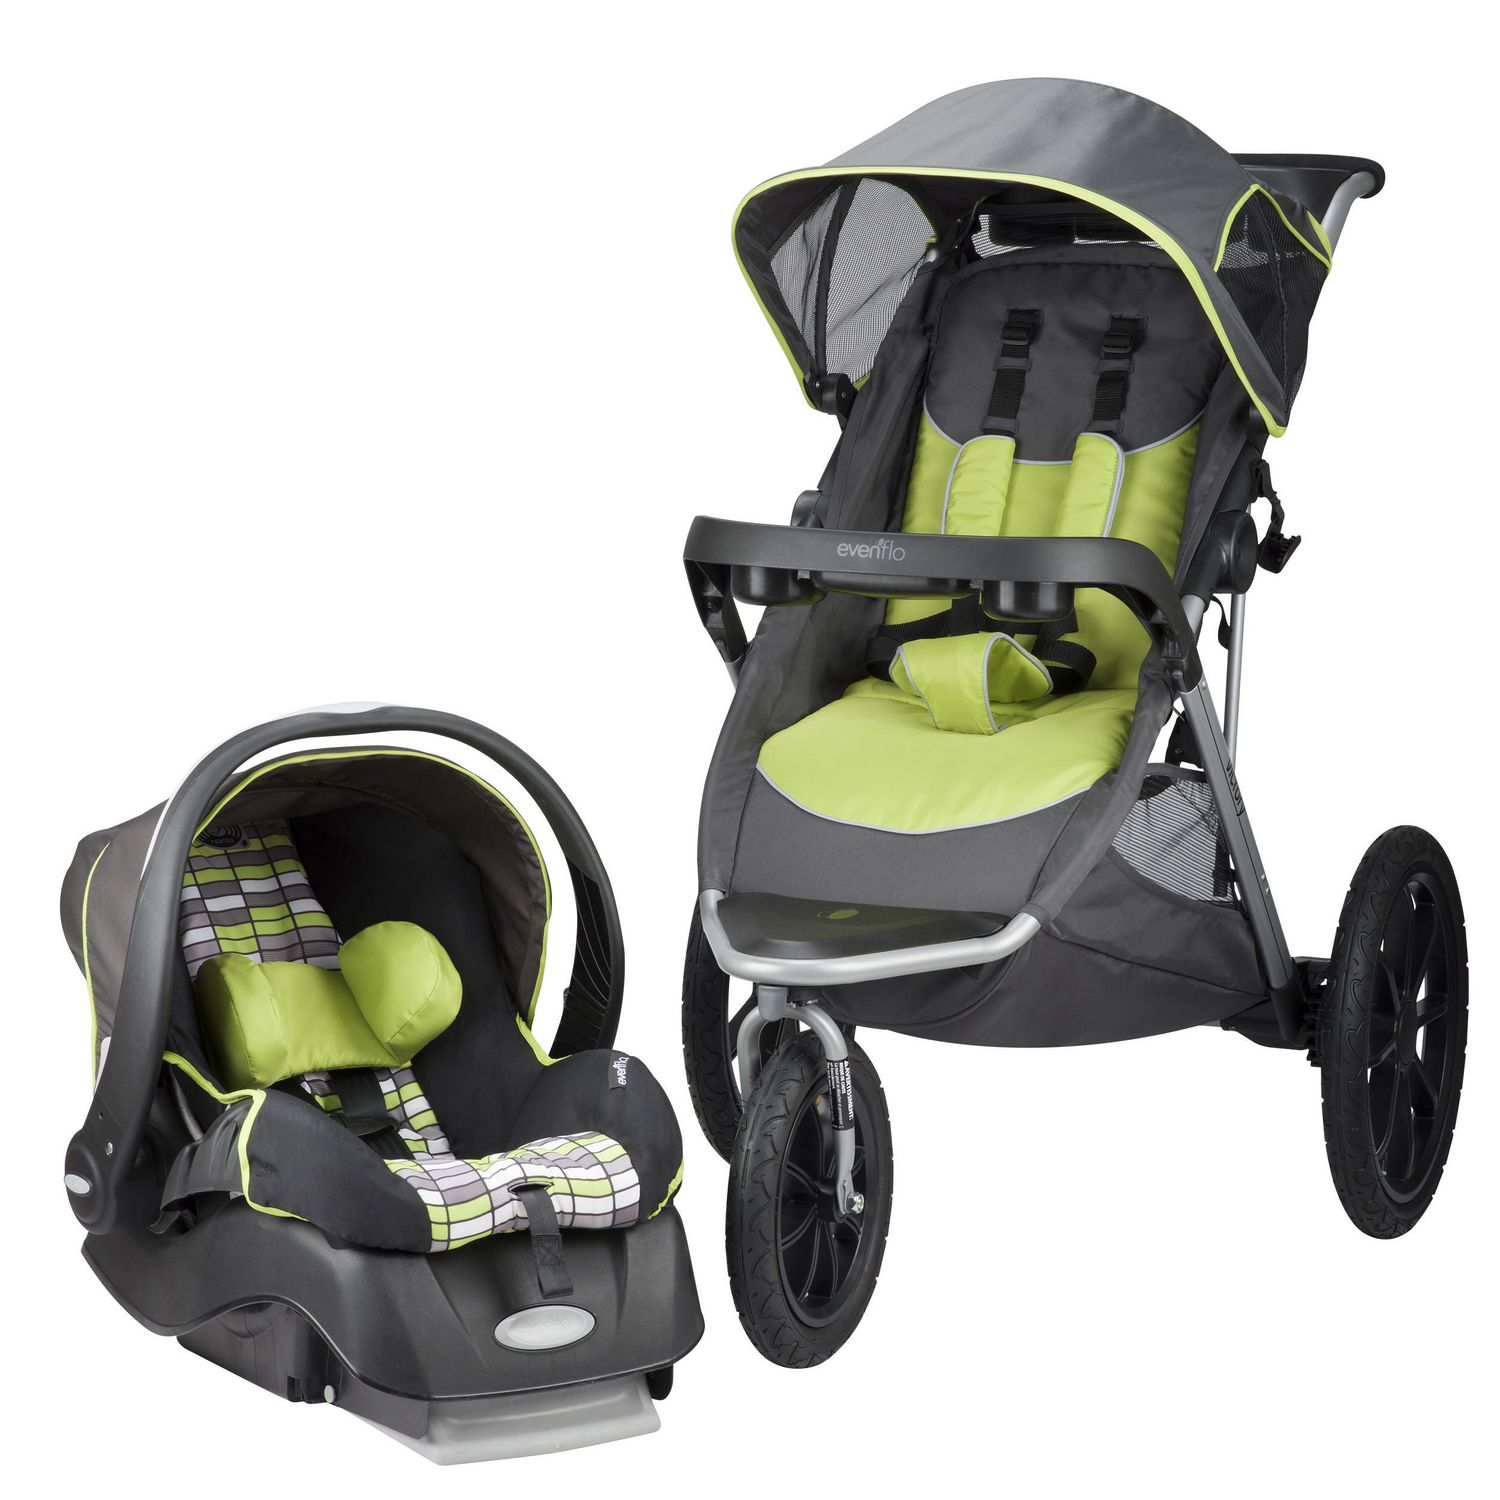 evenflo victory plus jogging stroller with litemax infant car seat